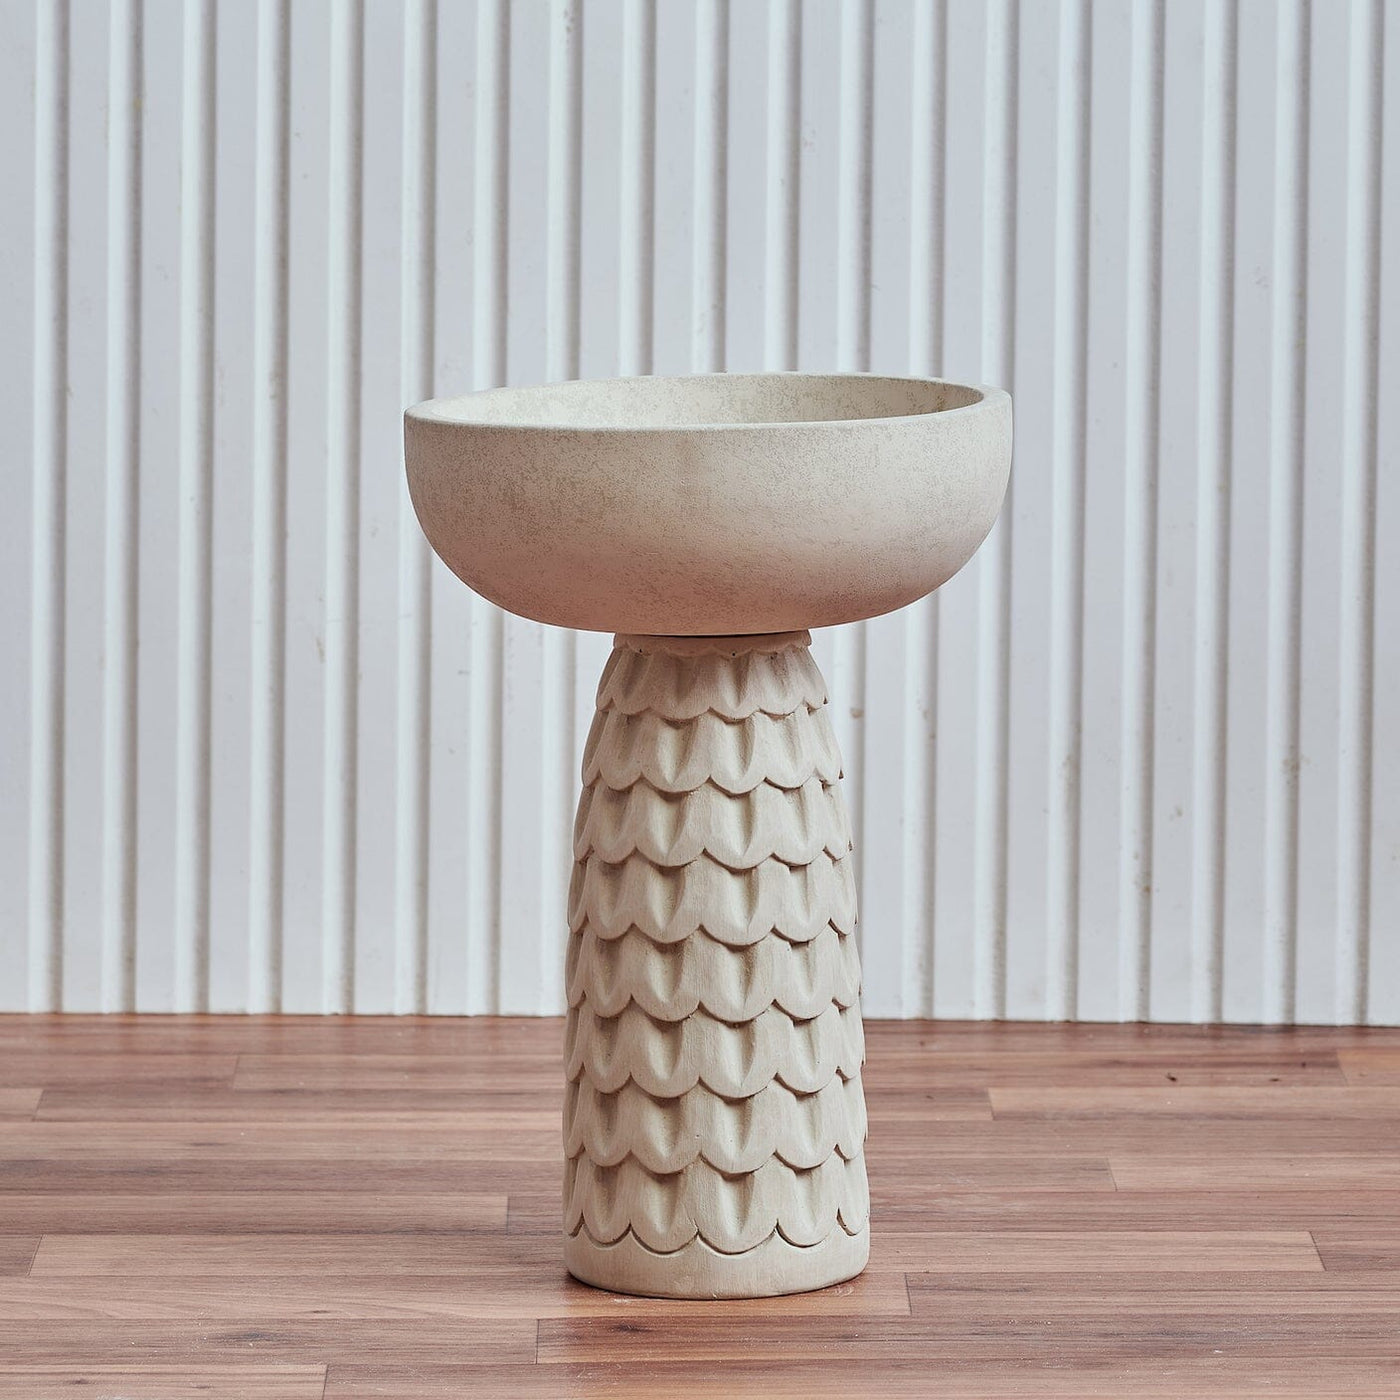 The "Bowl-T" - Side Table